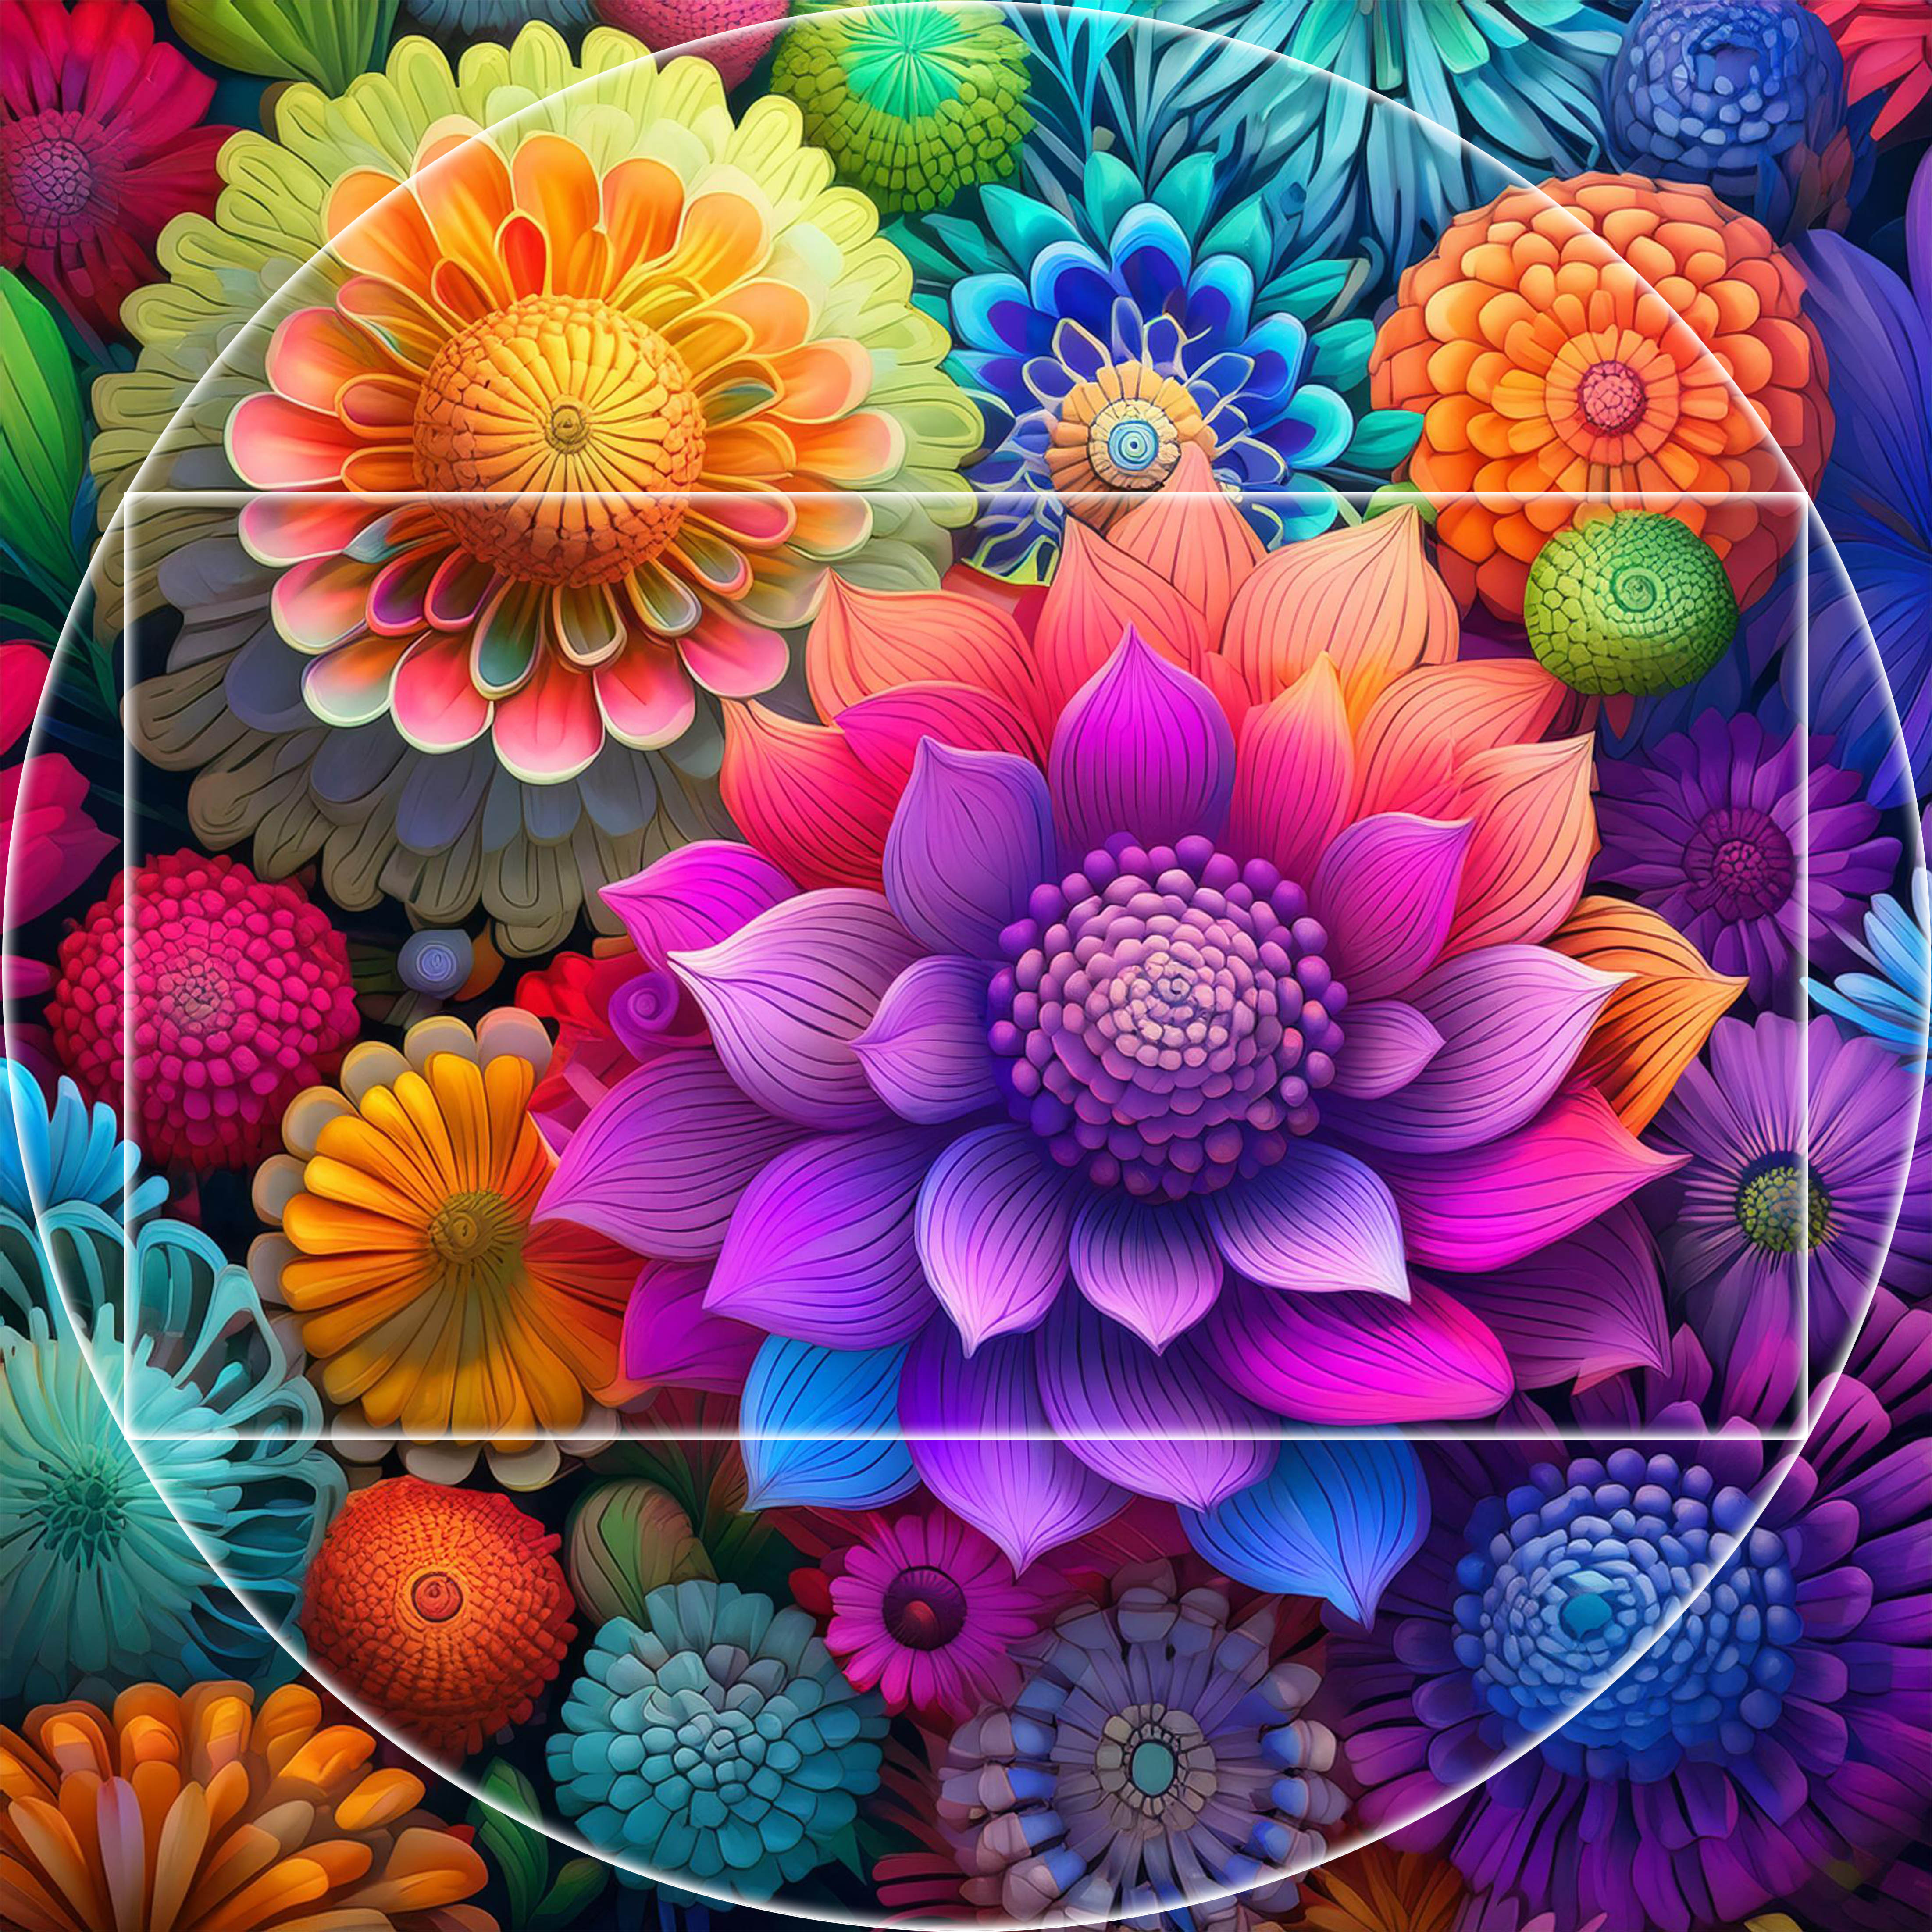 Psychedelic Flowers with Circle and 4K image.jpg